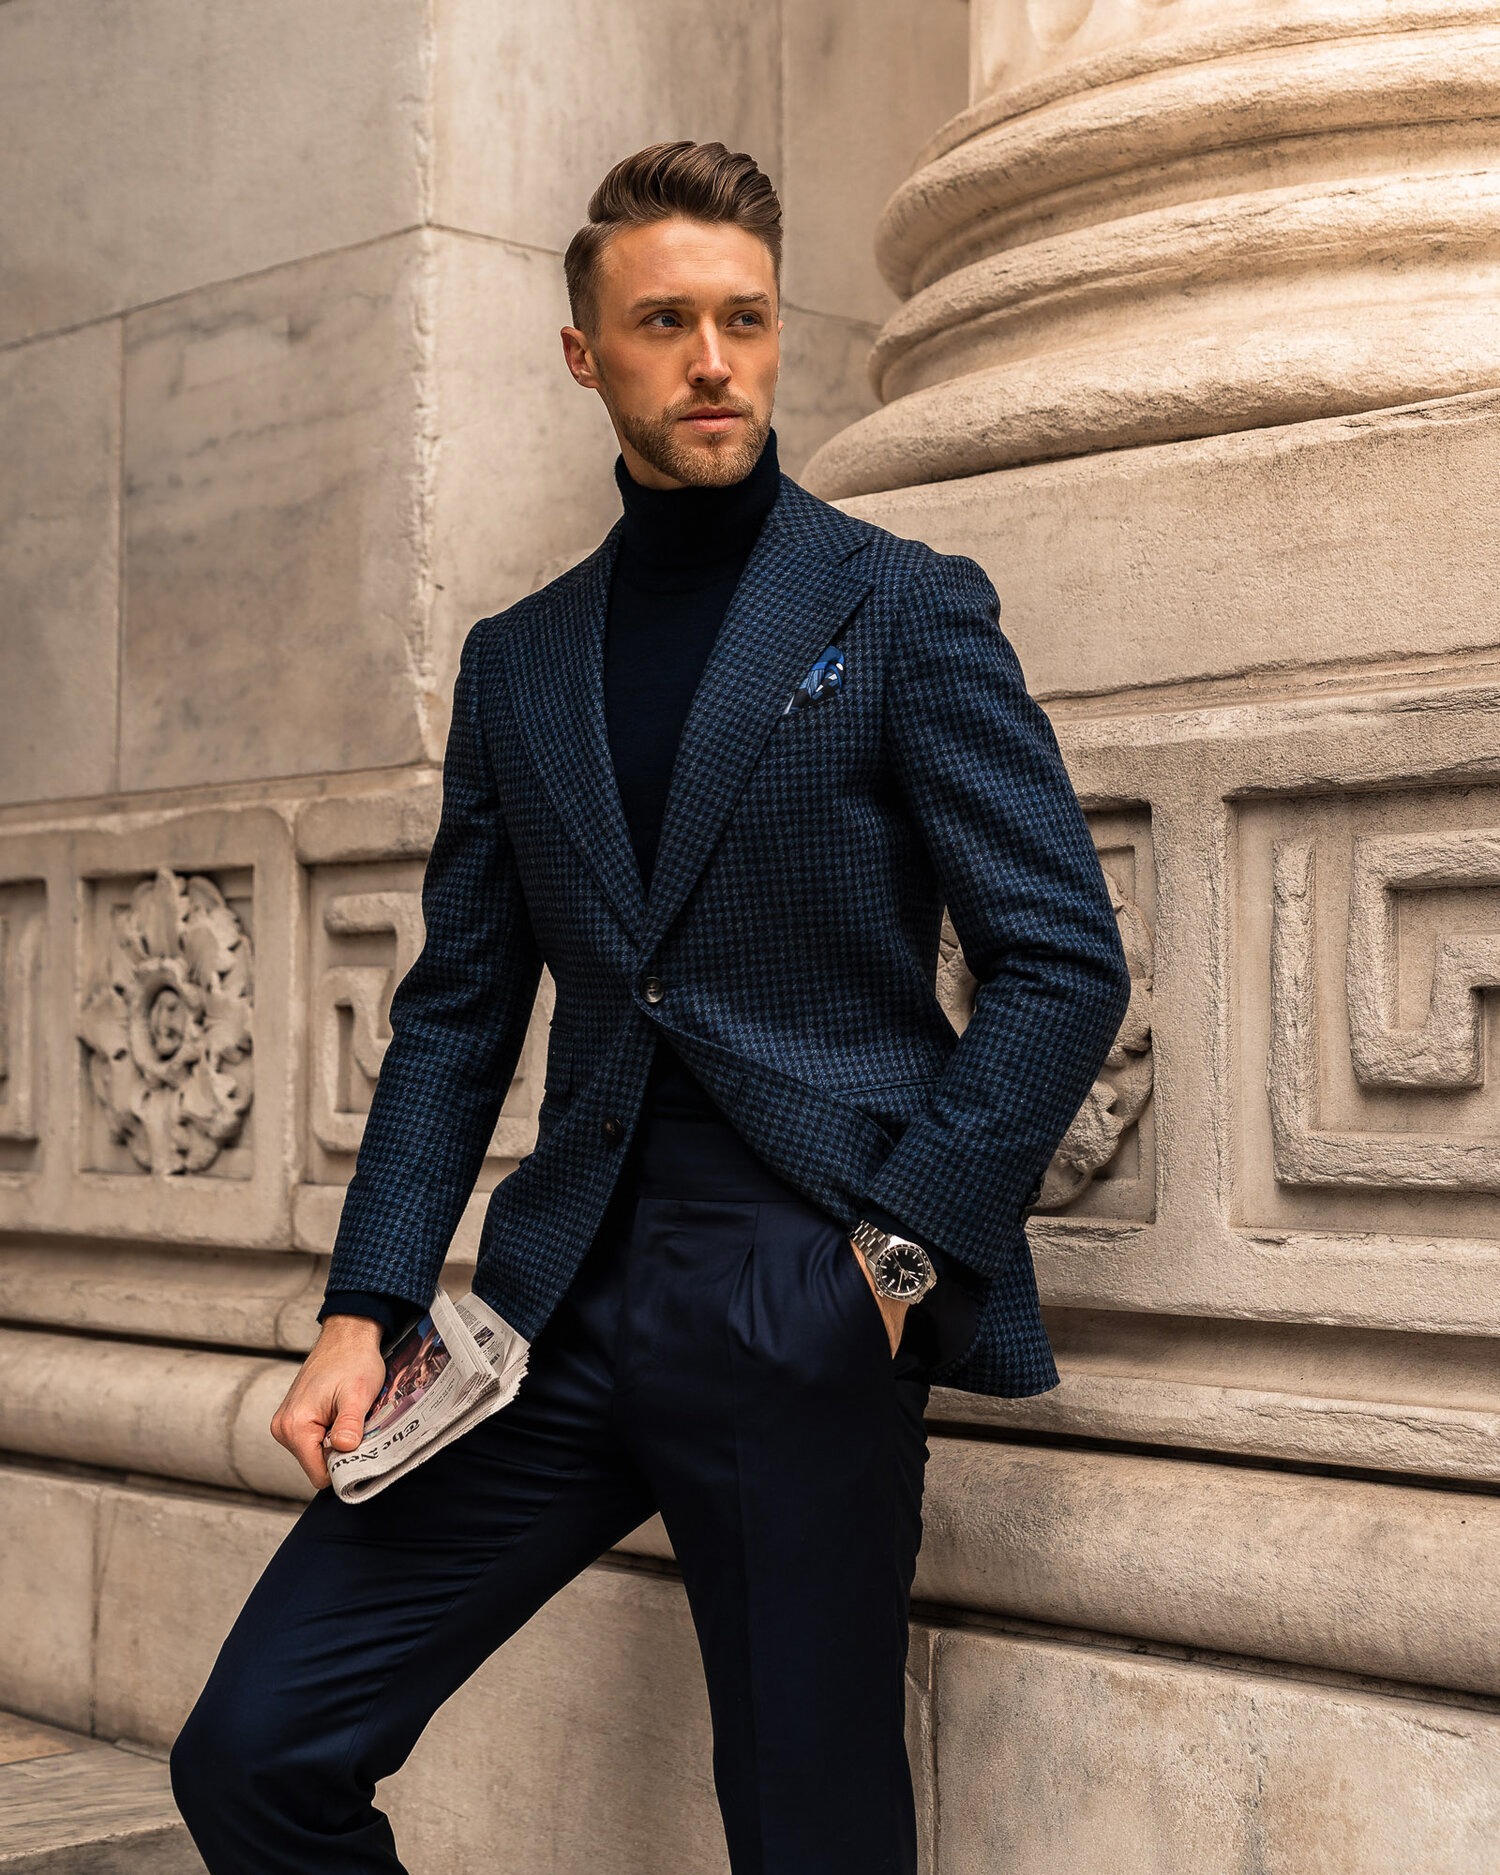 How to Master the Turtleneck with a Suit Look - Suits Expert